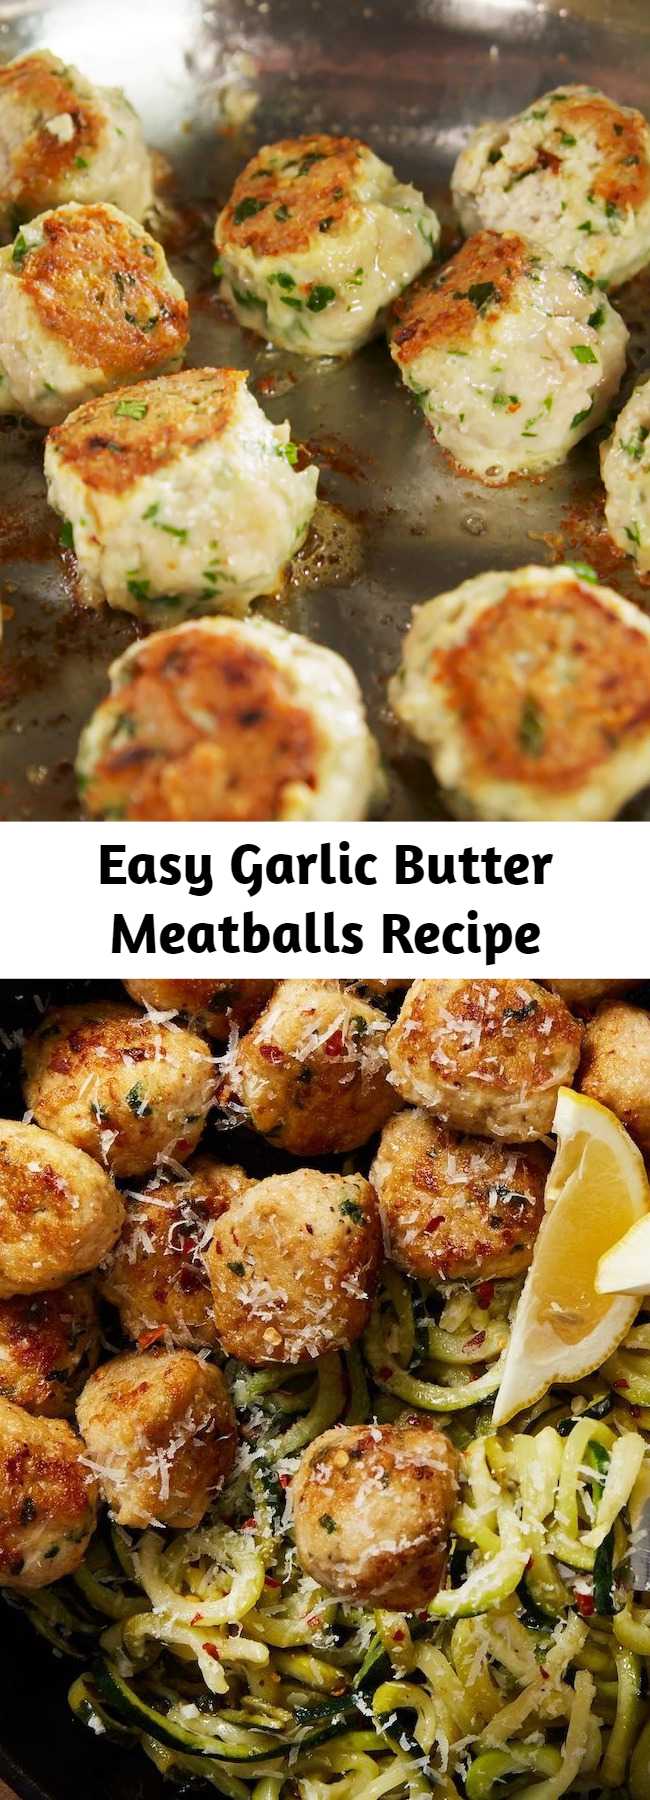 Easy Garlic Butter Meatballs Recipe - These garlic butter meatballs are low-carb, gluten free, and all around better for you without skipping out on any of the tastiness. #easy #recipe #glutenfree #lowcarb #healthy #garlic #butter #meatballs #chicken #easy #diet